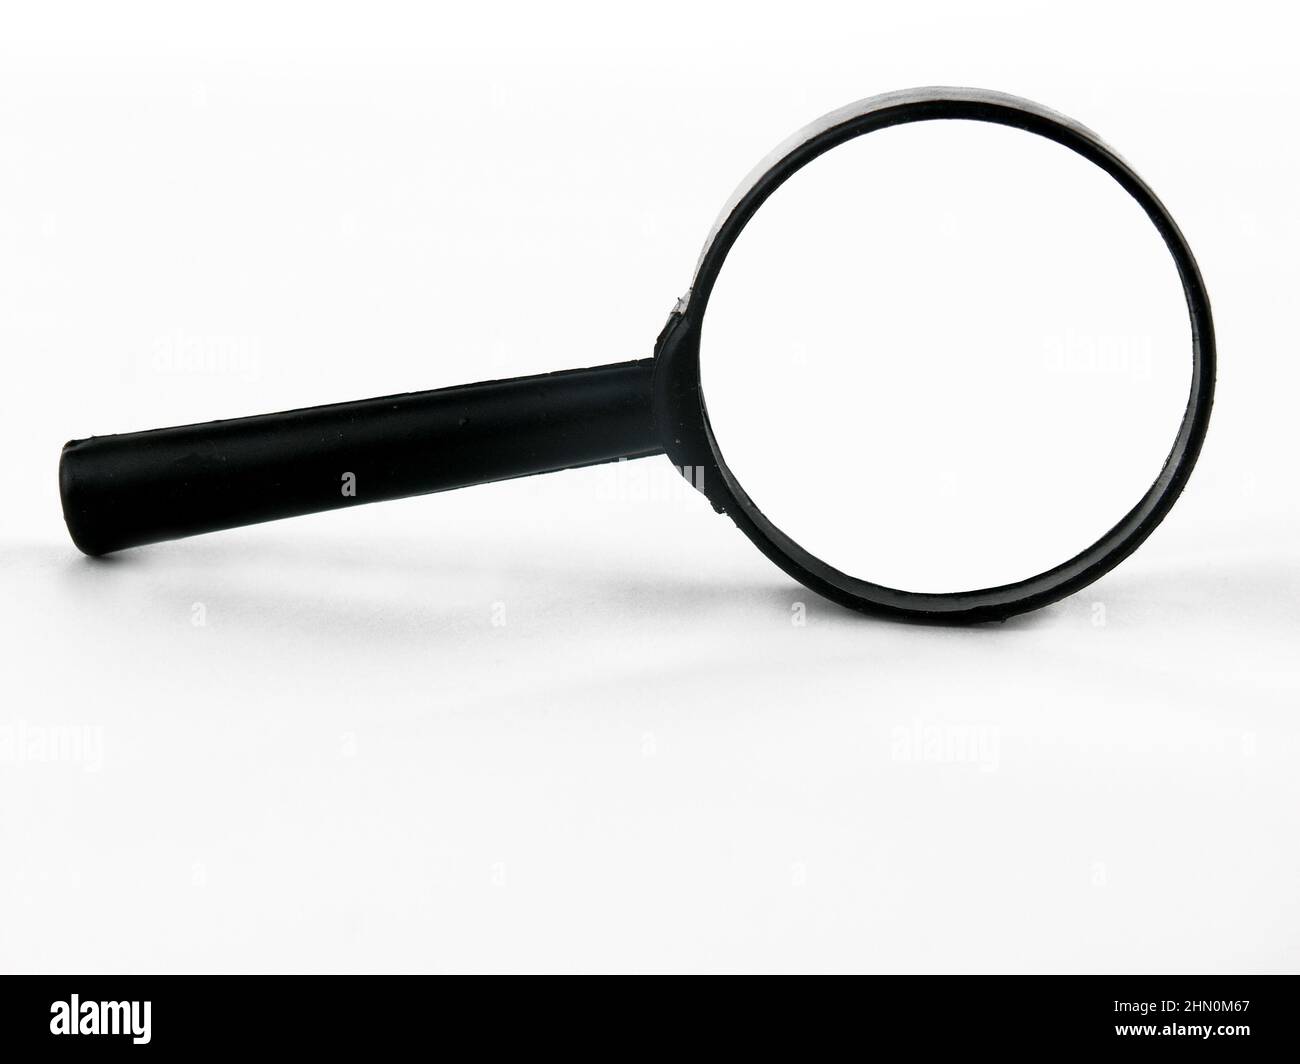 800+ Free Lupa & Magnifying Glass Images - Pixabay